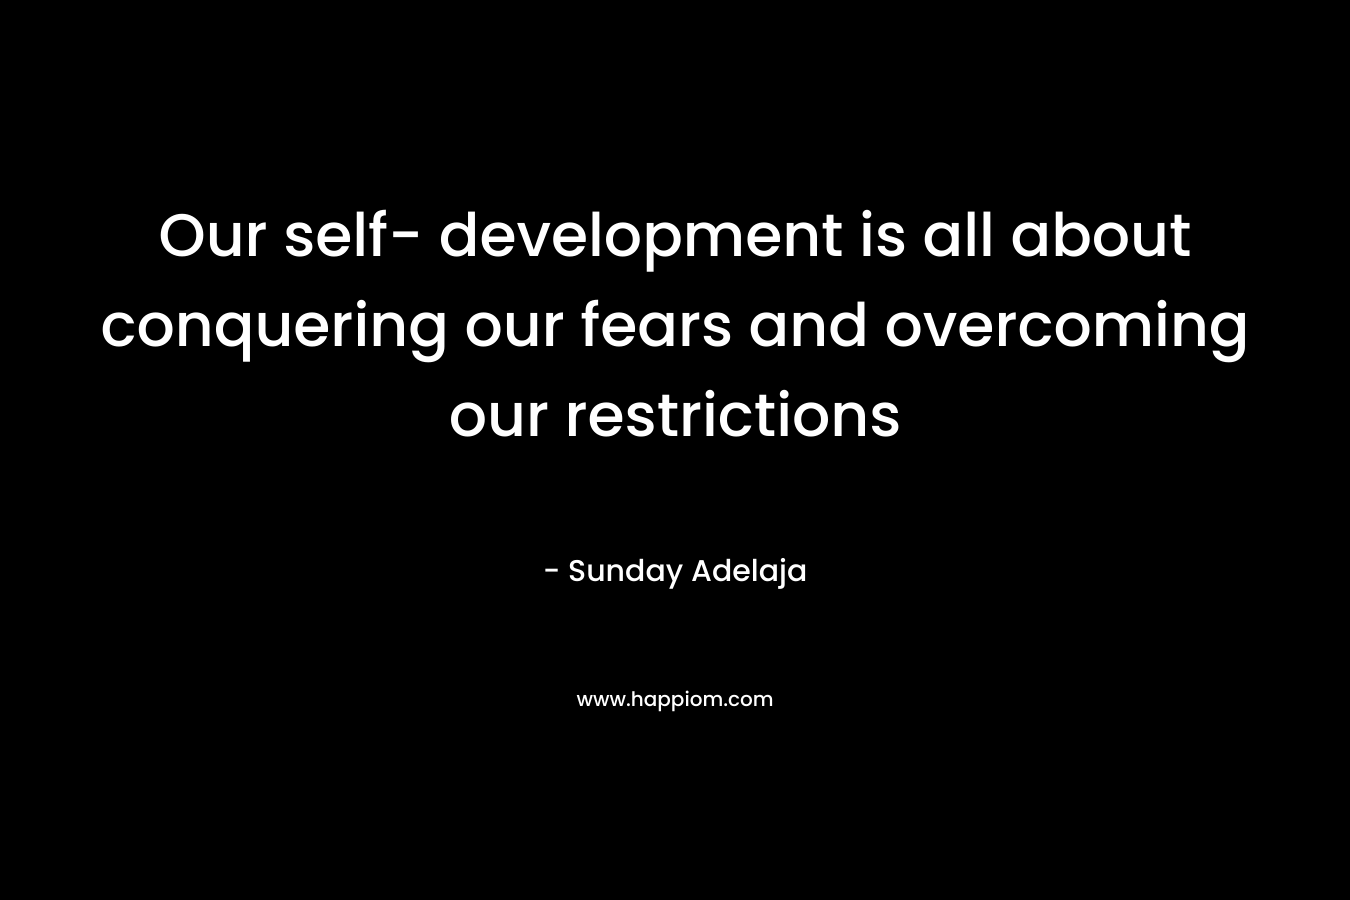 Our self- development is all about conquering our fears and overcoming our restrictions – Sunday Adelaja